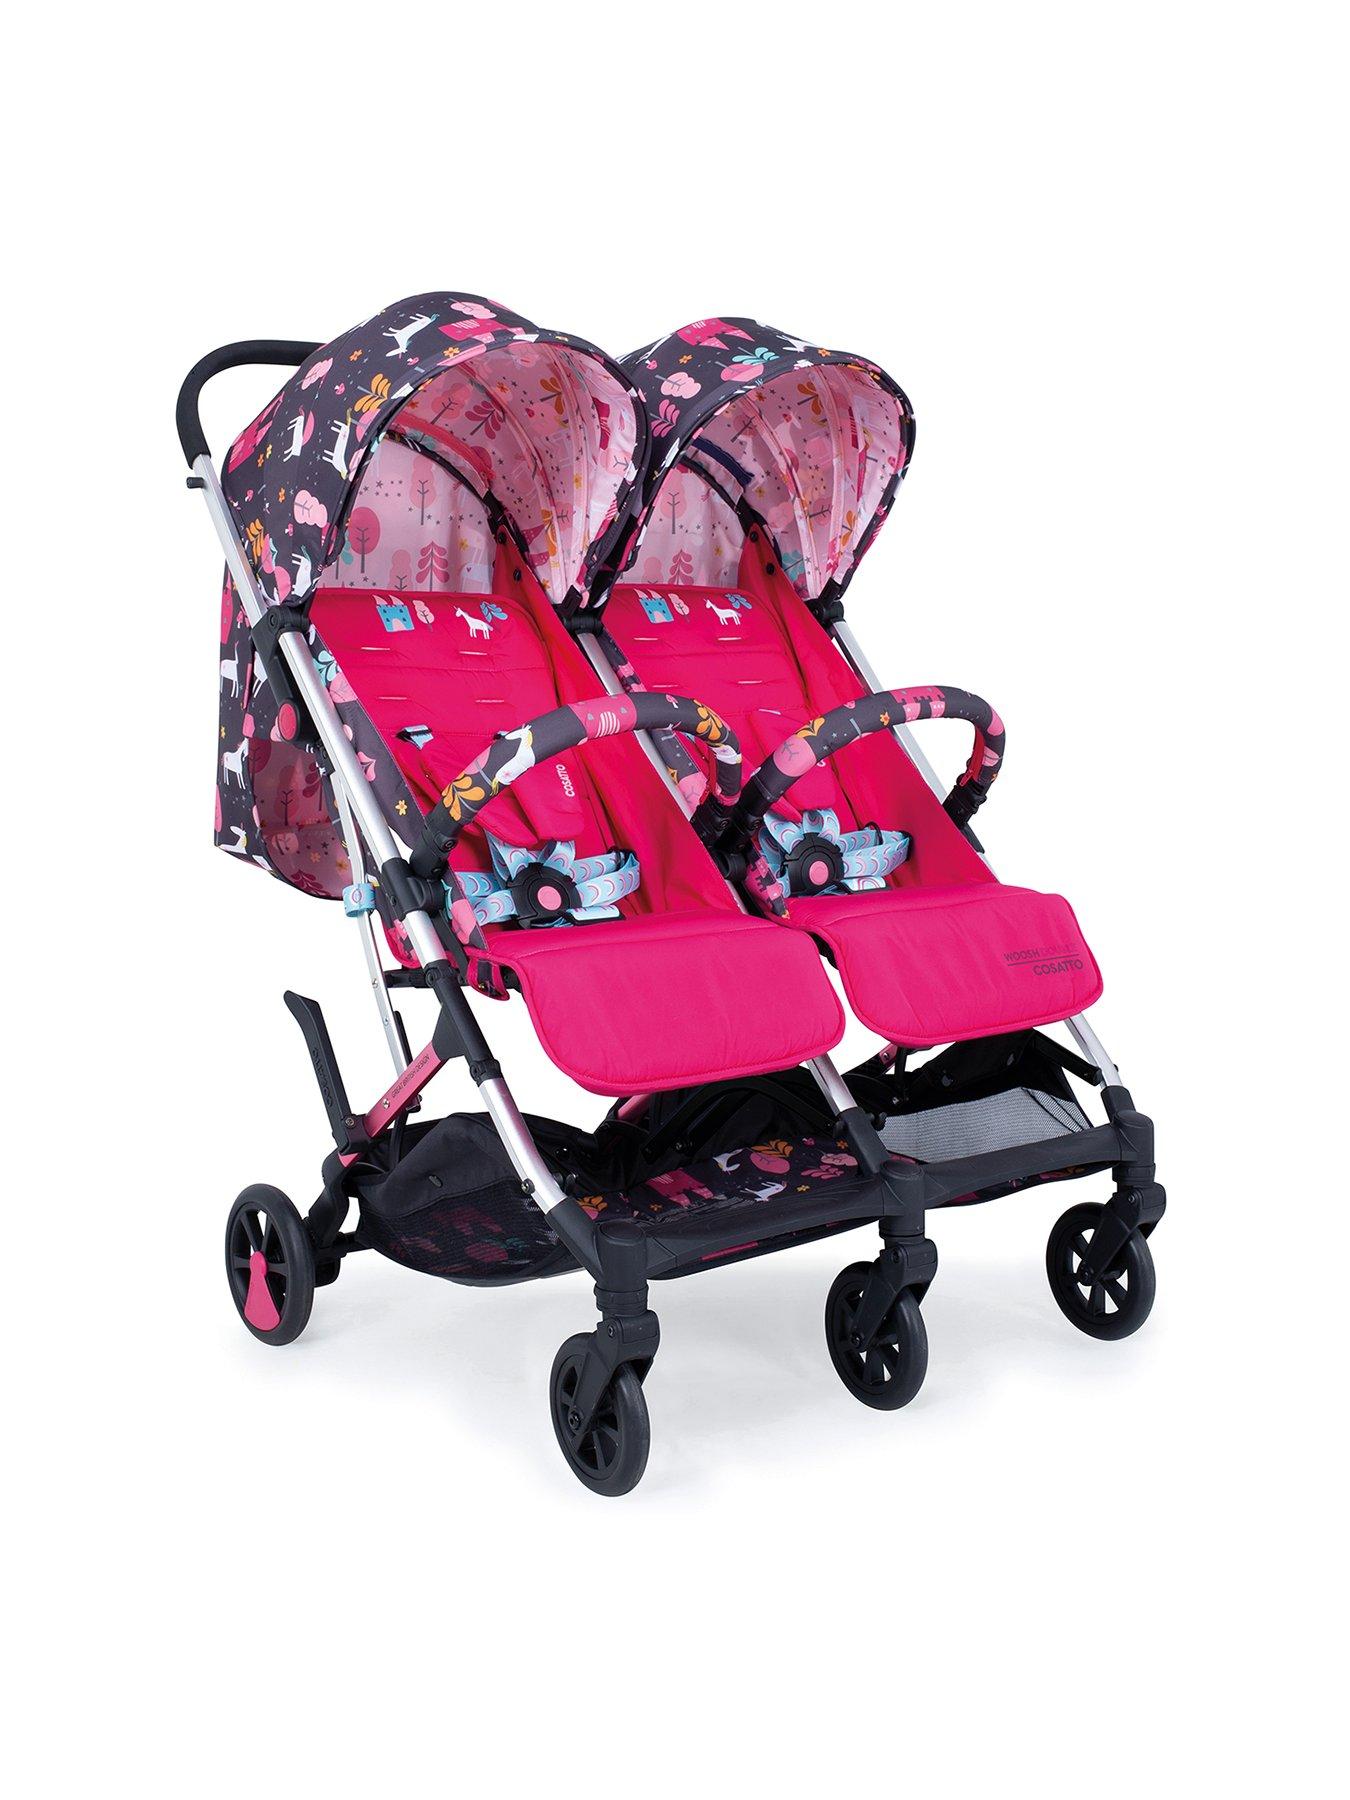 second hand twin pushchairs